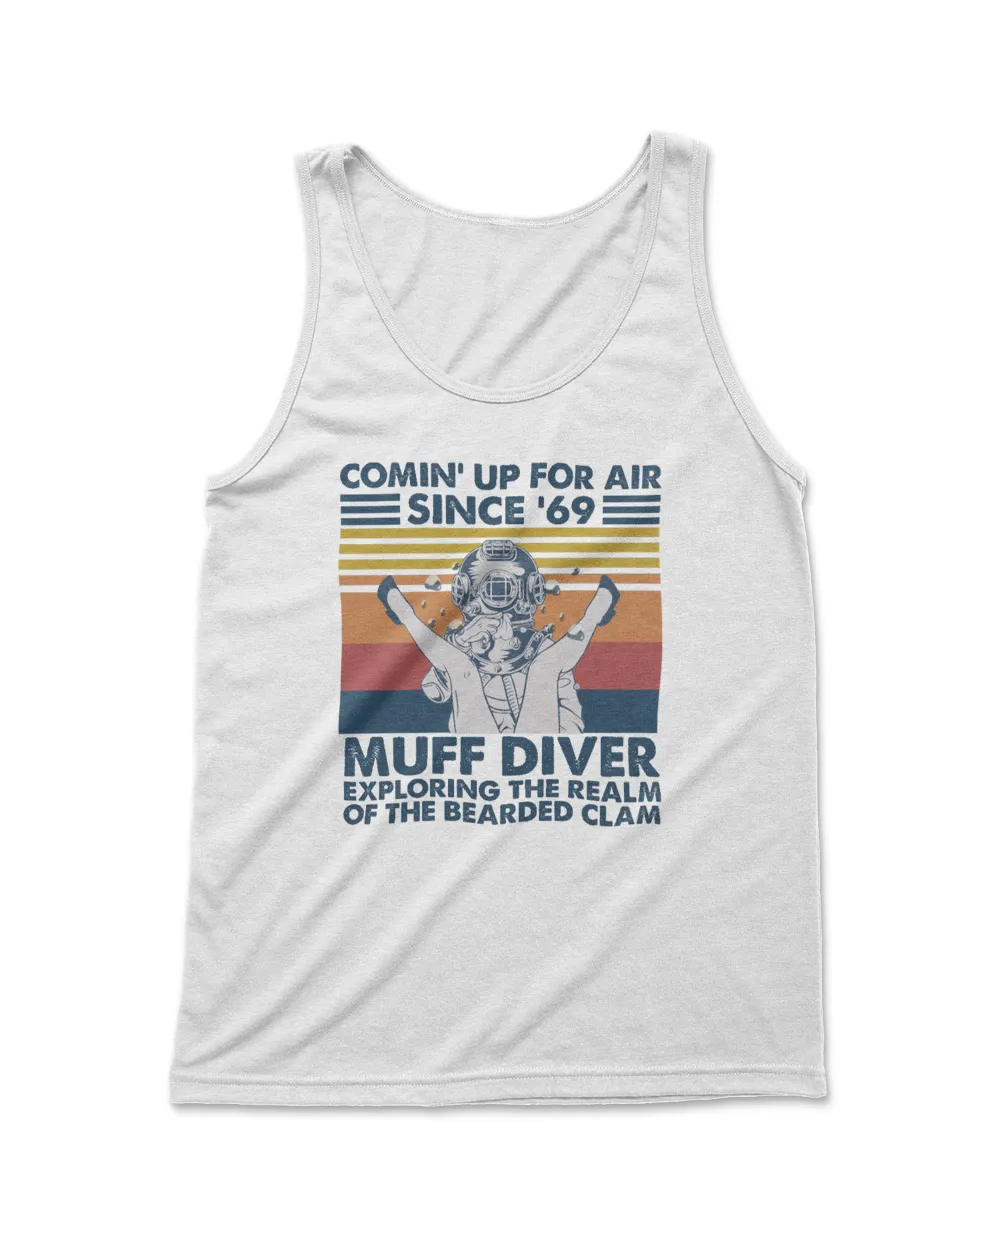 Comin Up For Air Since 69 Muff Diver Exploring The Realm Of The Bearded Clam Vintage